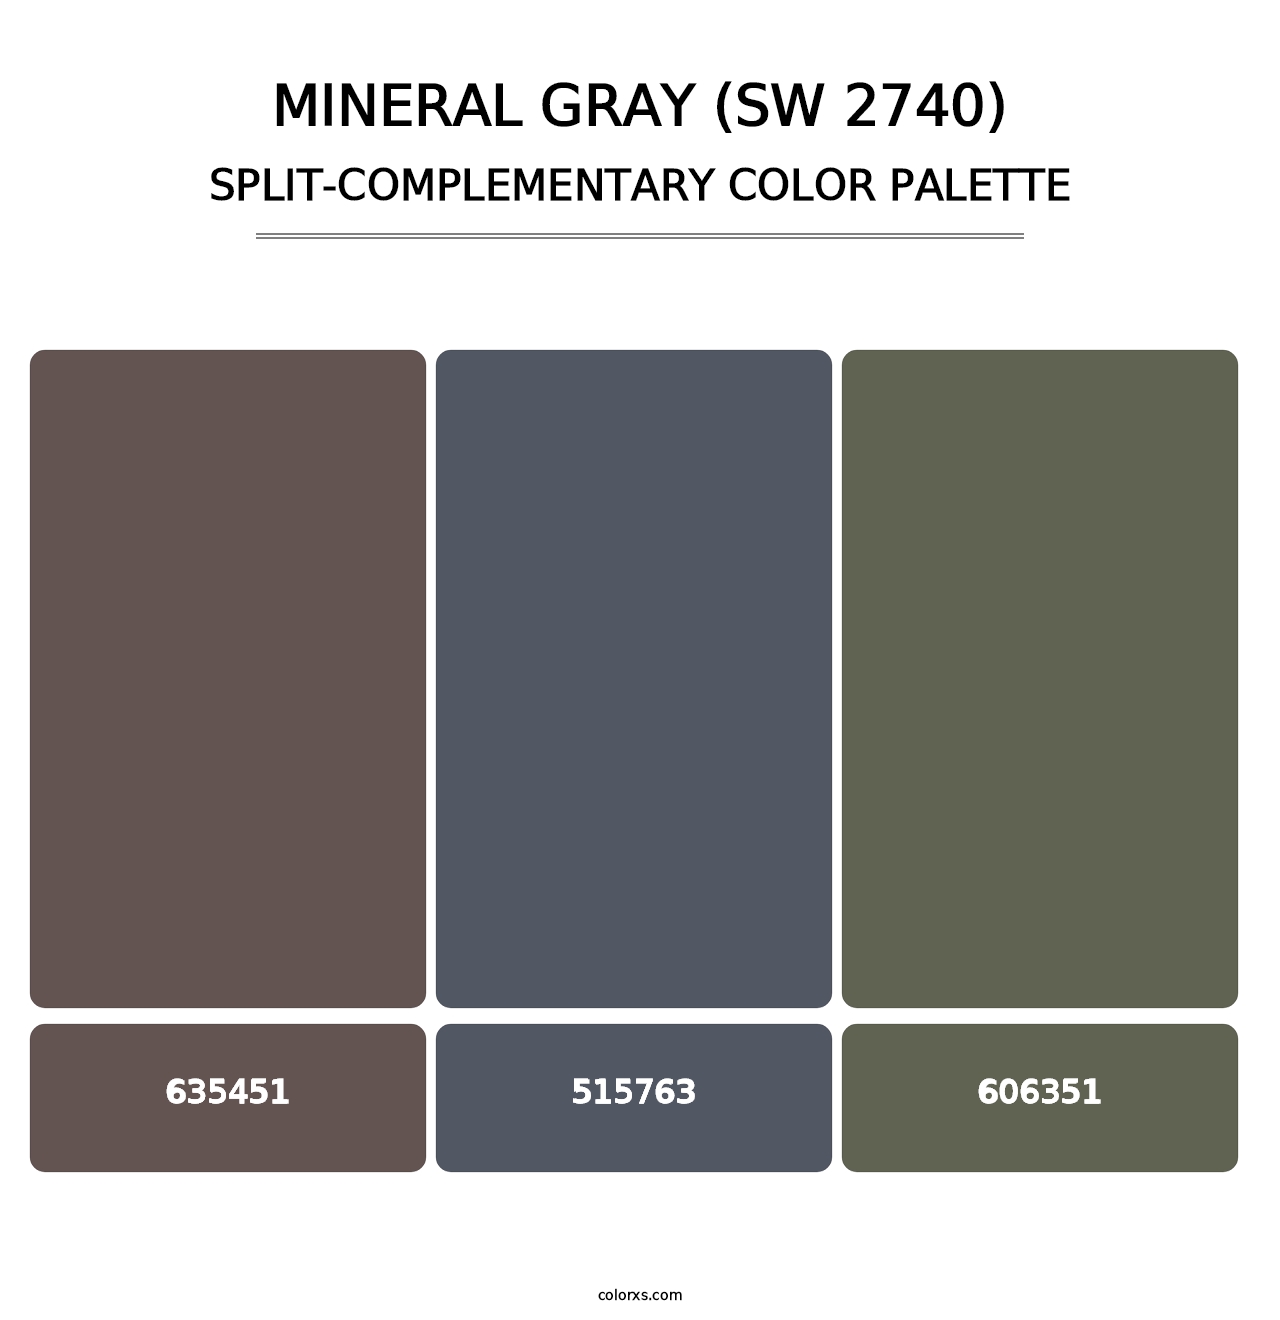 Mineral Gray (SW 2740) - Split-Complementary Color Palette